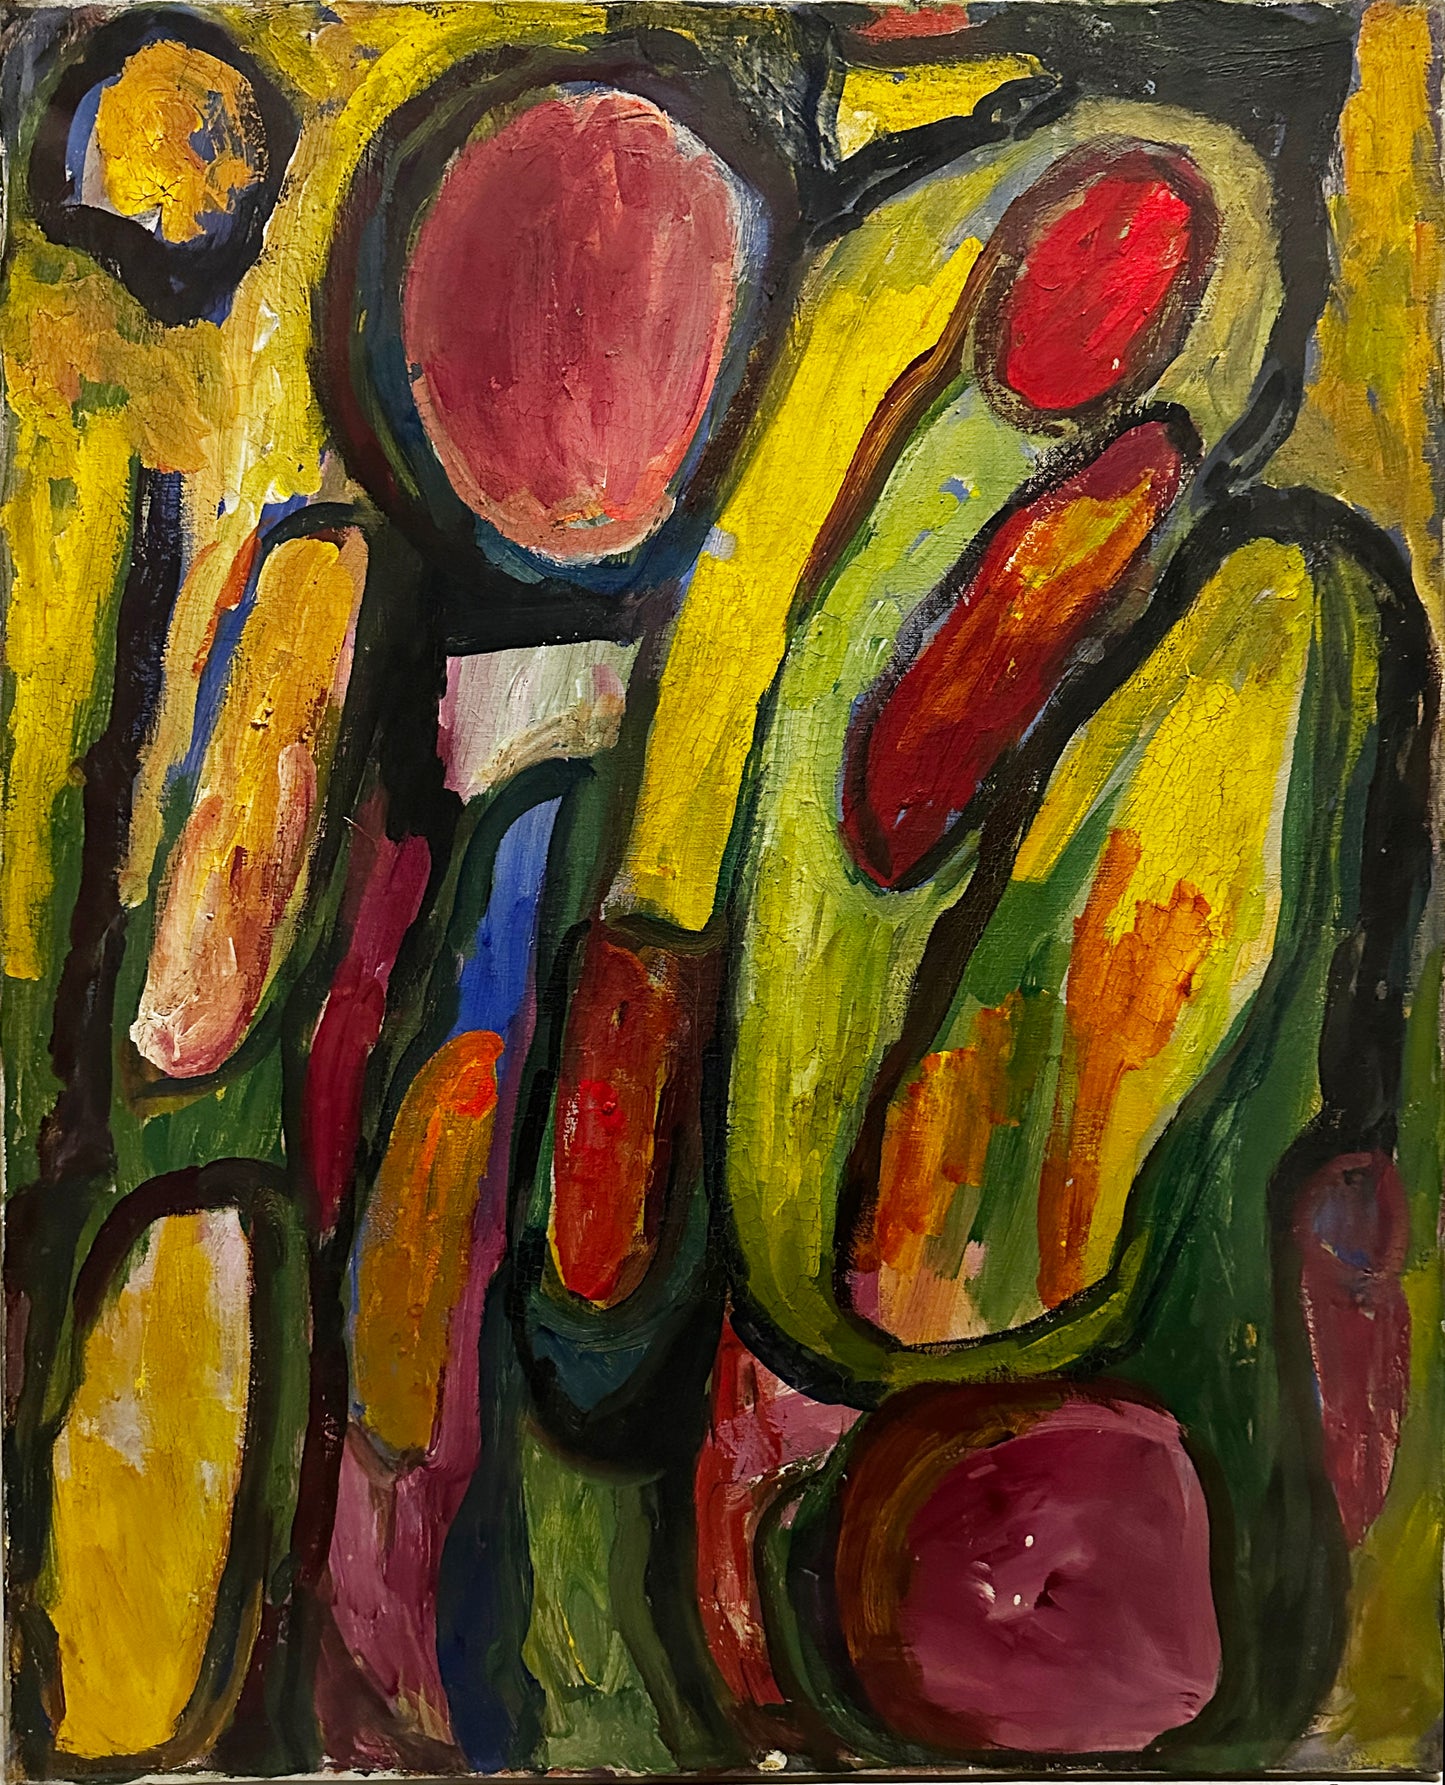 Oil Painting by Szabo: Abstract figures